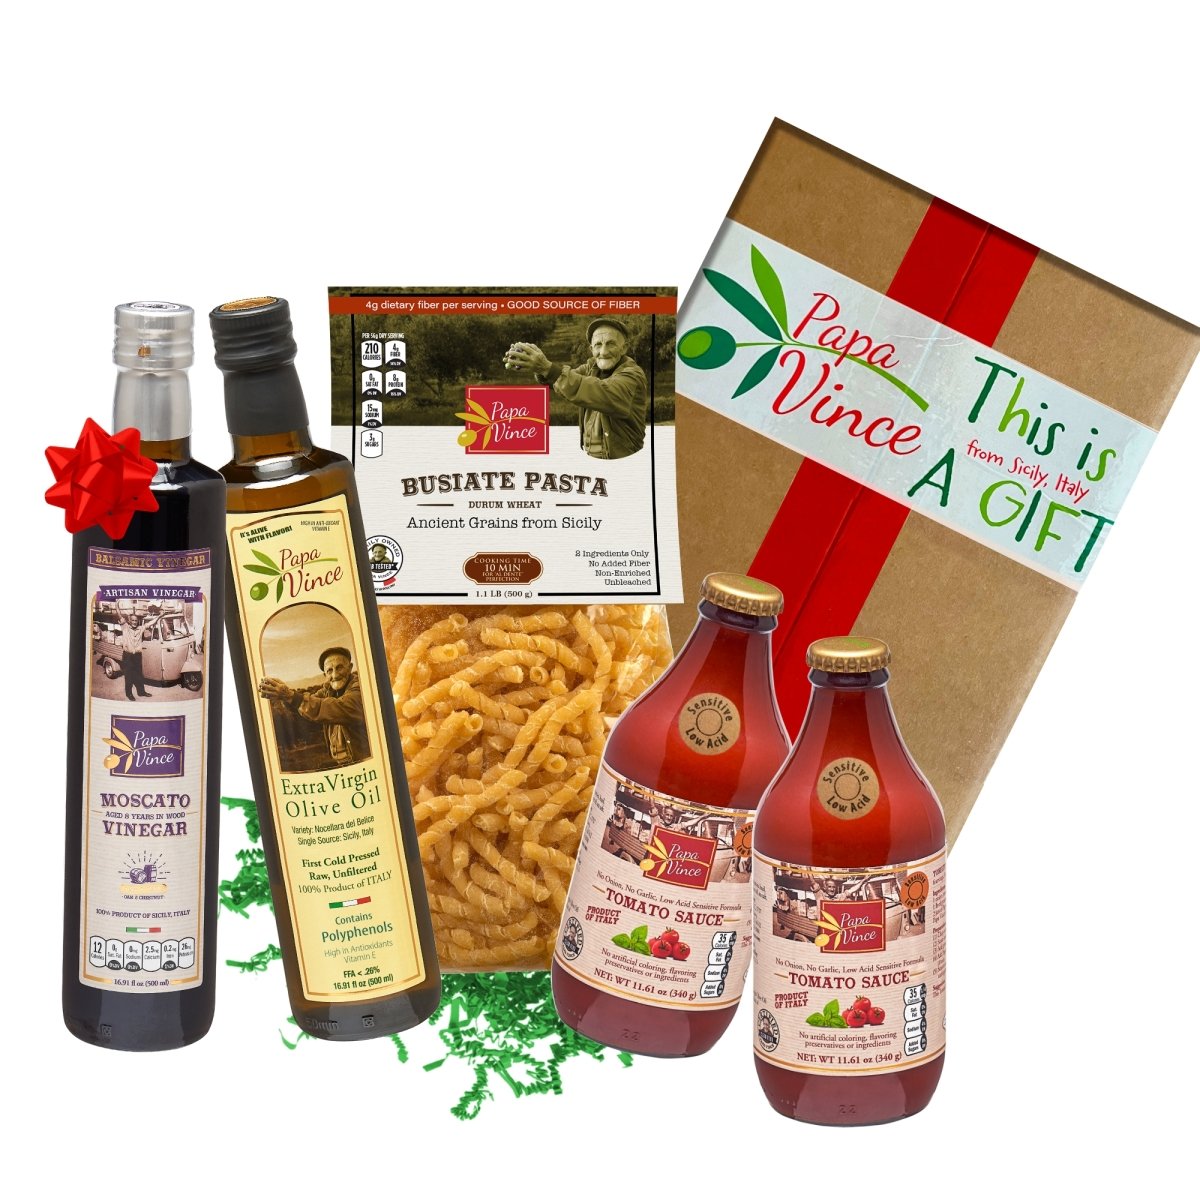 Gourmet Italian Food in Gift Box - made by our family in Italy from organic ingredients locally grown in Sicily. Authentic Pasta Texture, Genuine Tomato Sauce, Peppery EVOO bring you back to Italy - Papa Vince